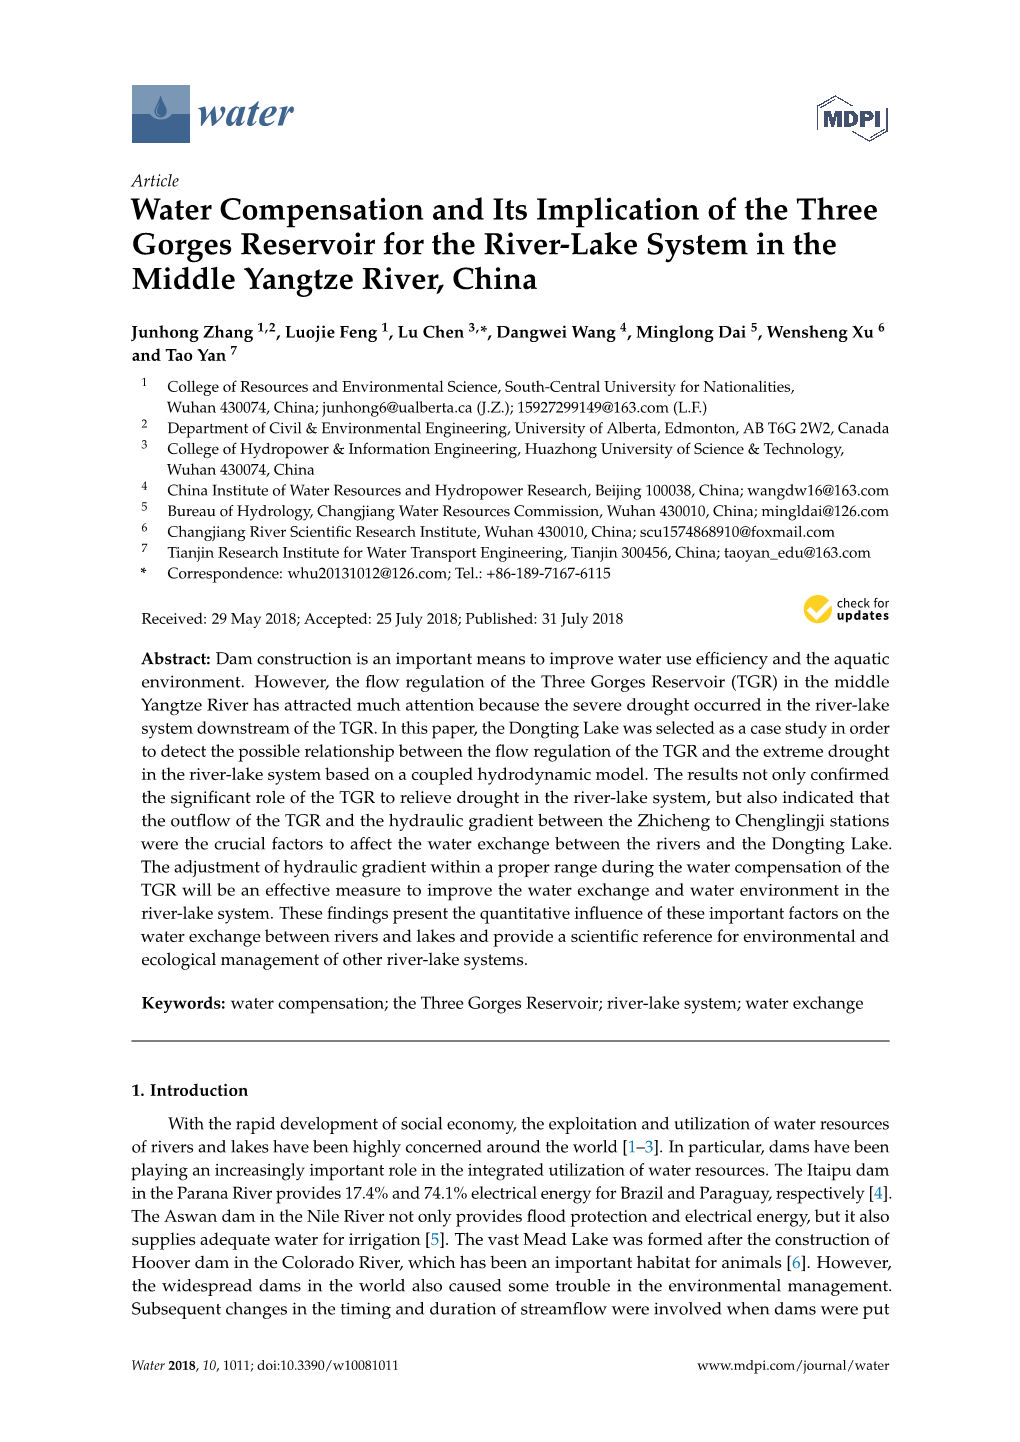 Water Compensation and Its Implication of the Three Gorges Reservoir for the River-Lake System in the Middle Yangtze River, China